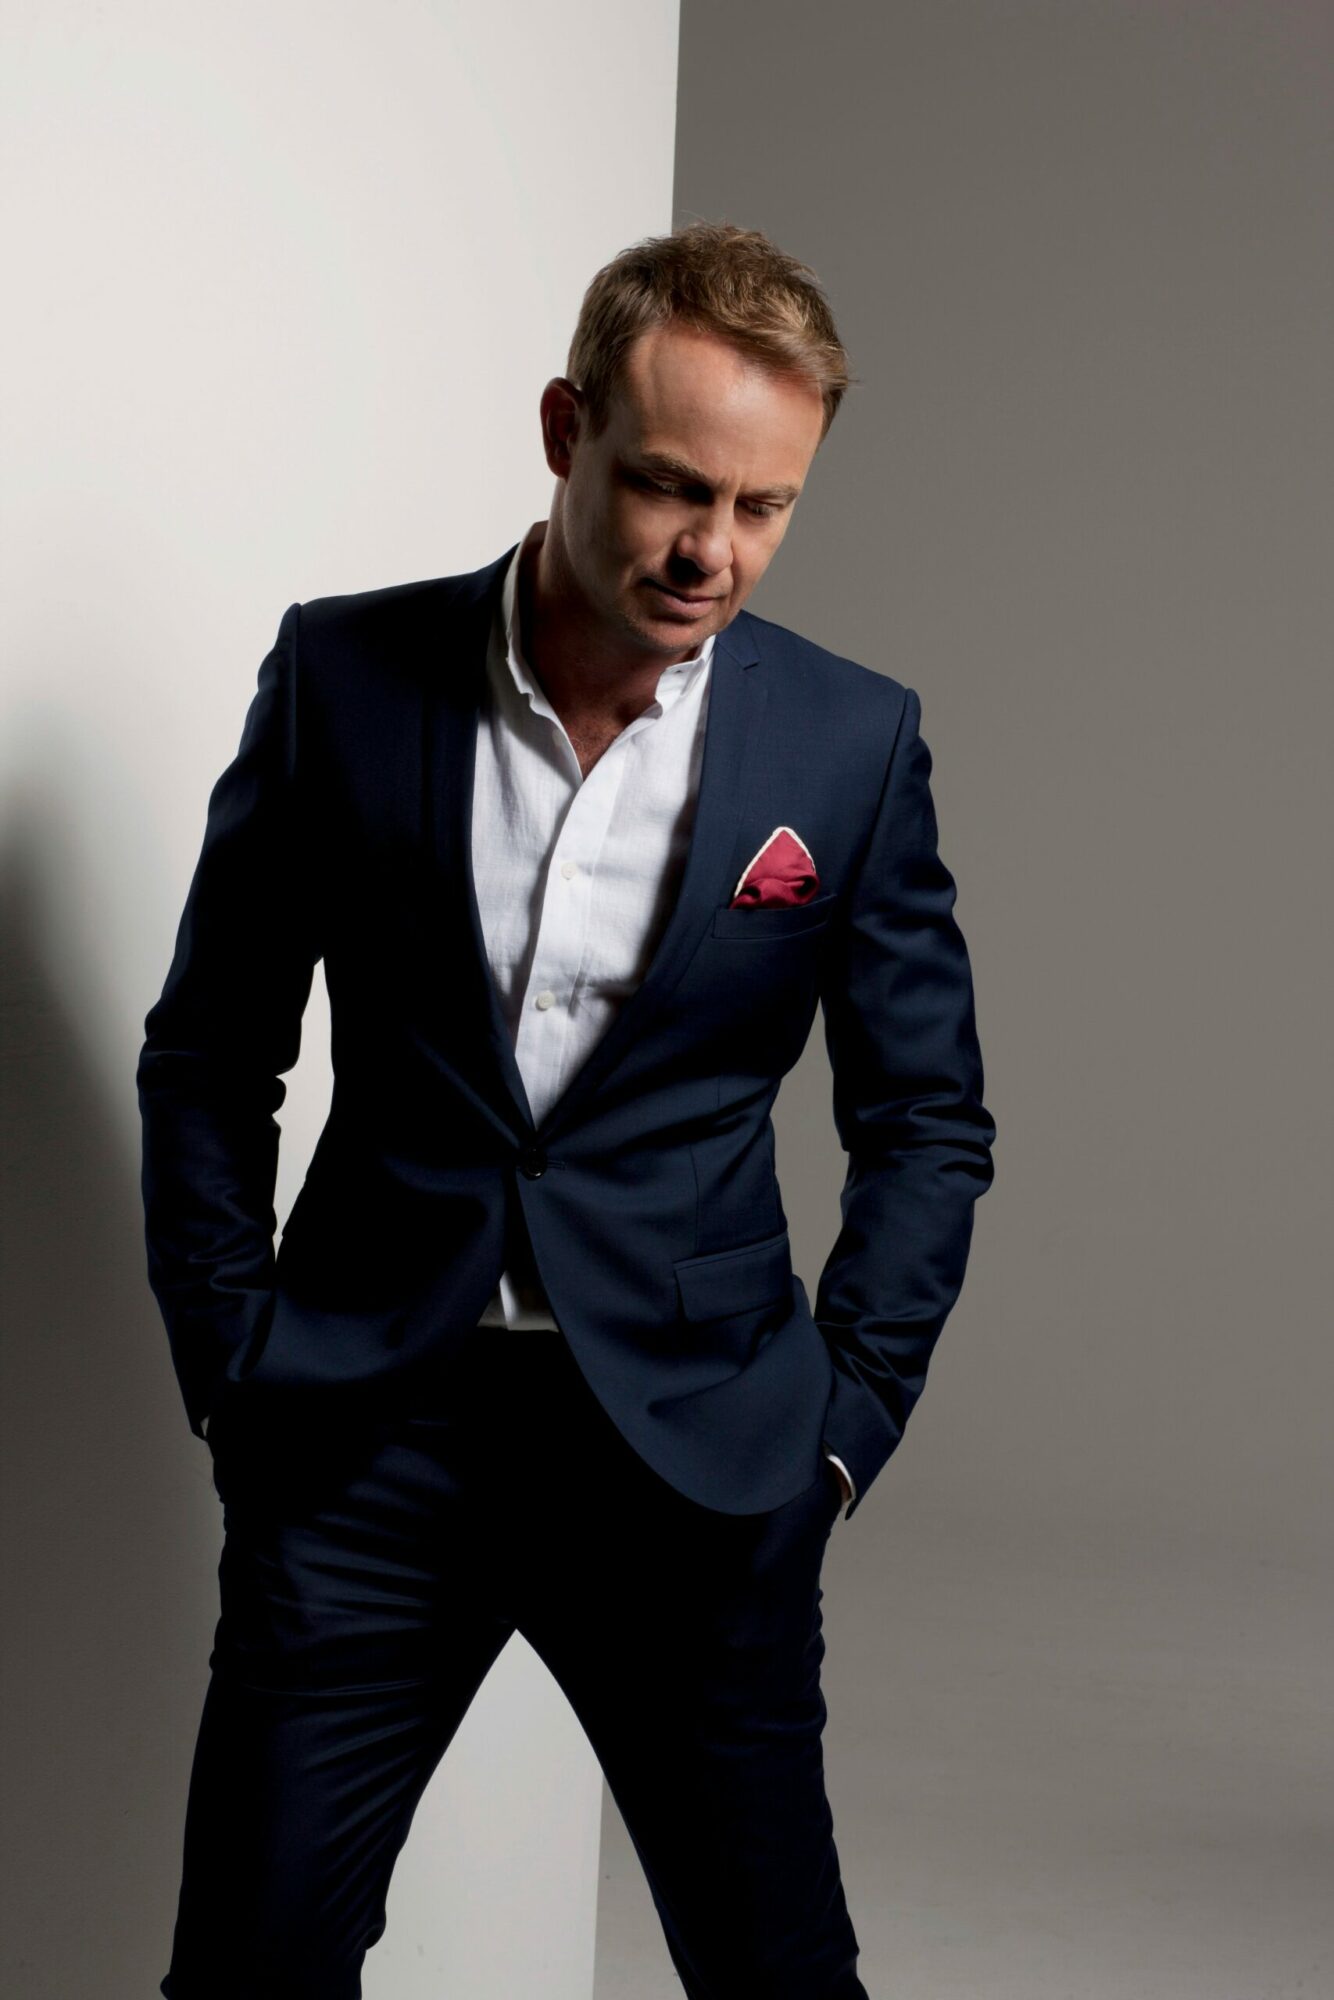 Image name Jason Donovan DOIN FINE 25 at York Barbican York scaled the 1 image from the post Jason Donovan - DOIN' FINE 25 at York Barbican, York in Yorkshire.com.